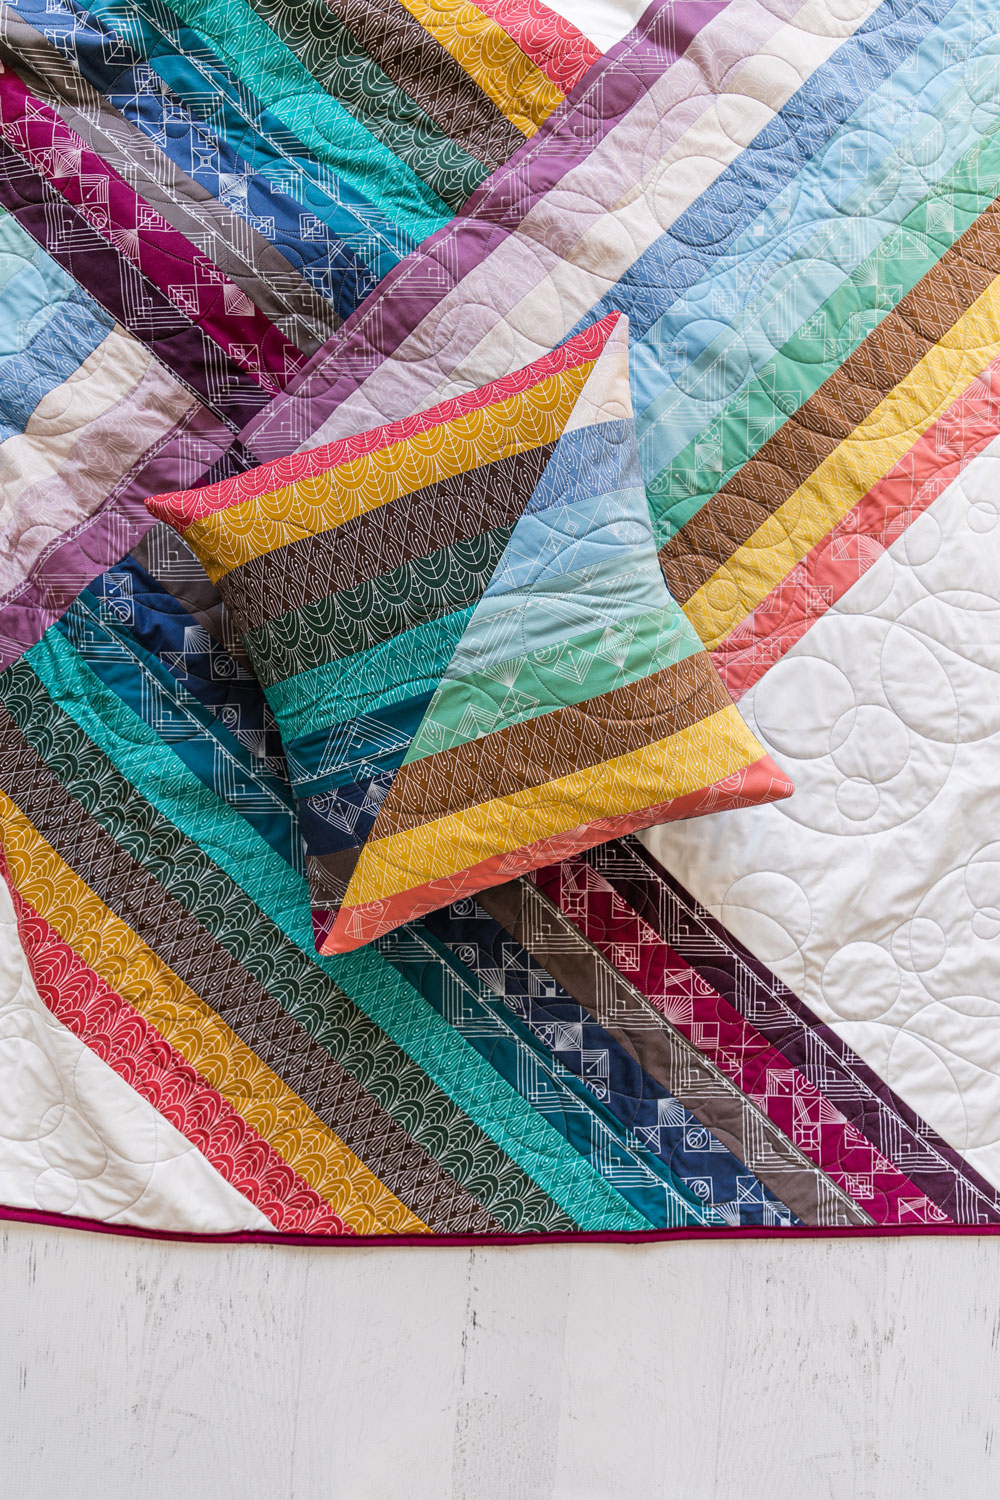 The Adventureland quilt along includes extra tips and inspiration to make this beginner and jelly roll friendly quilt pattern. suzyquilts.com #jellyrollpattern